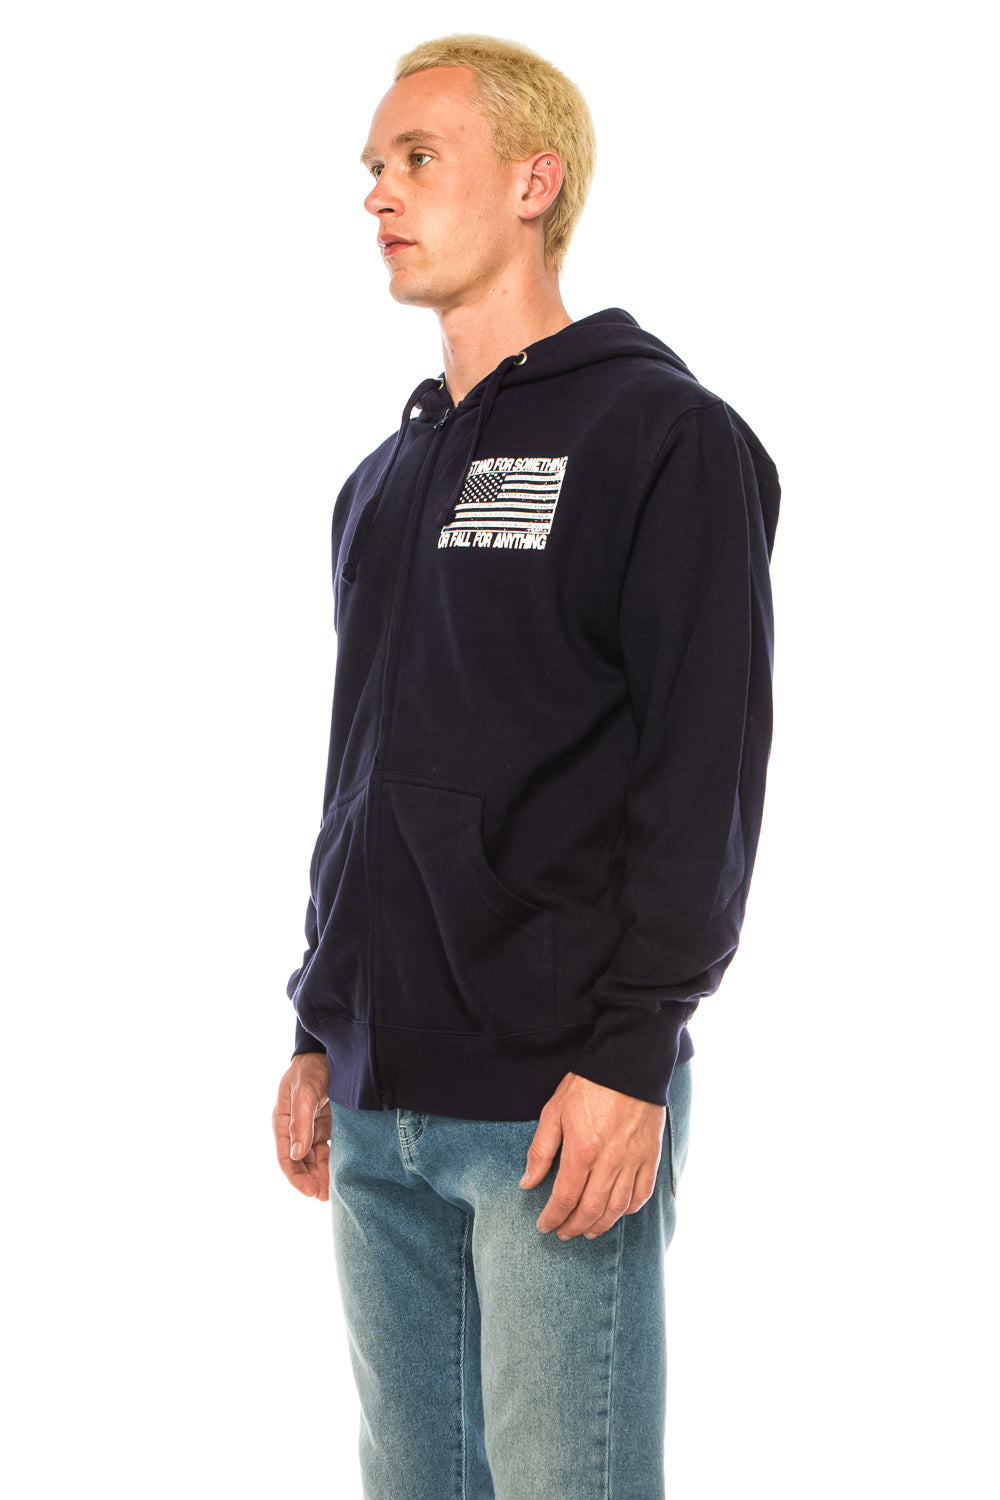 STAND FOR SOMETHING ZIP UP HOODIE - Trailsclothing.com